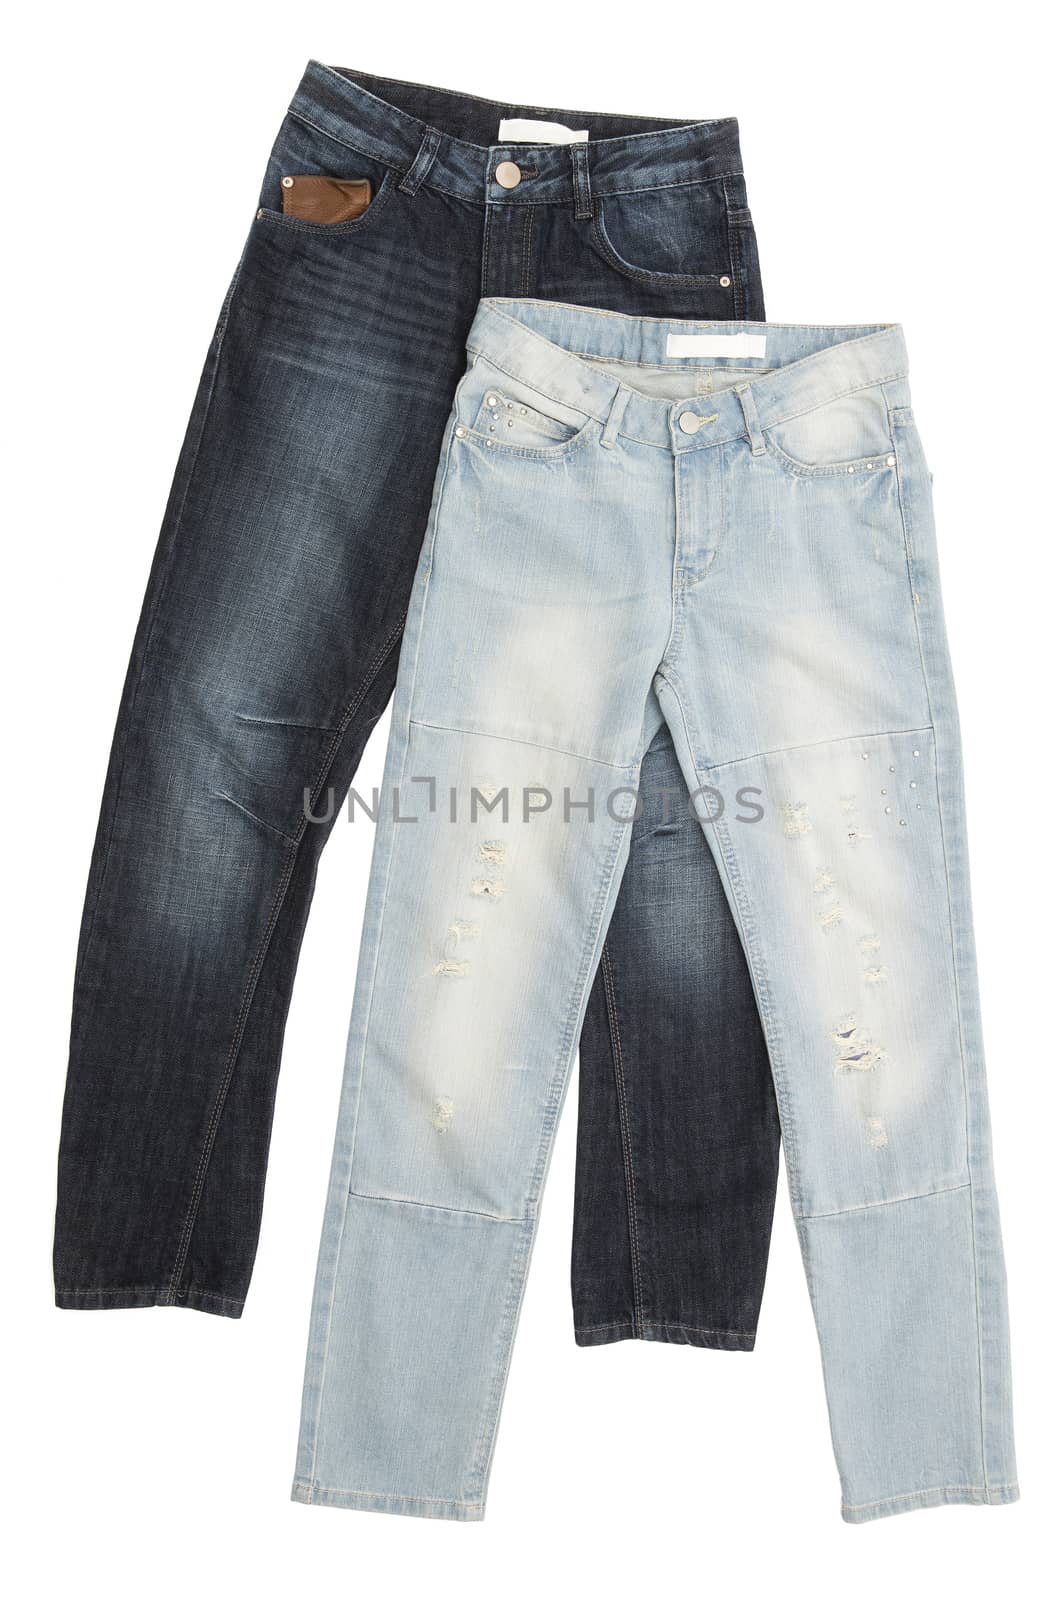 Two pair of blue jeans isolated on white background